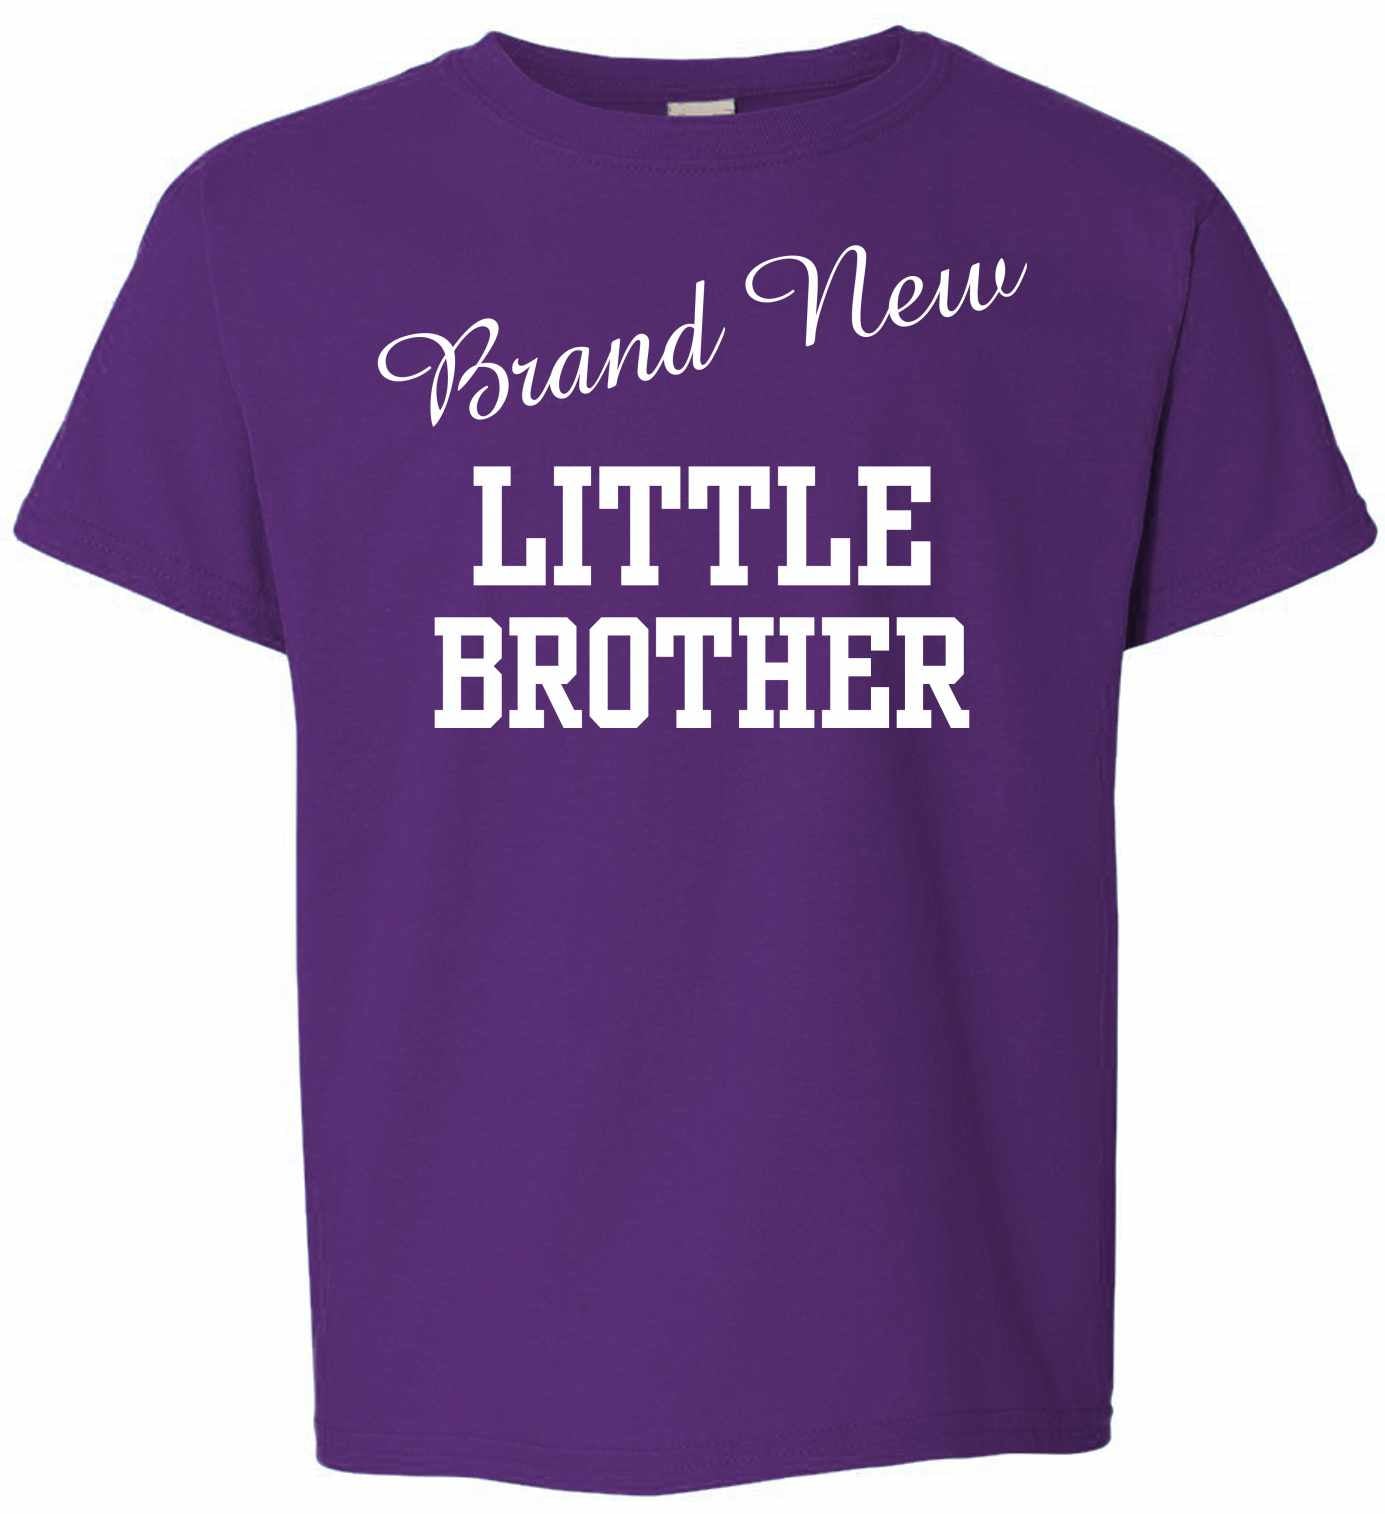 Brand New Little Brother on Kids T-Shirt (#1017-201)